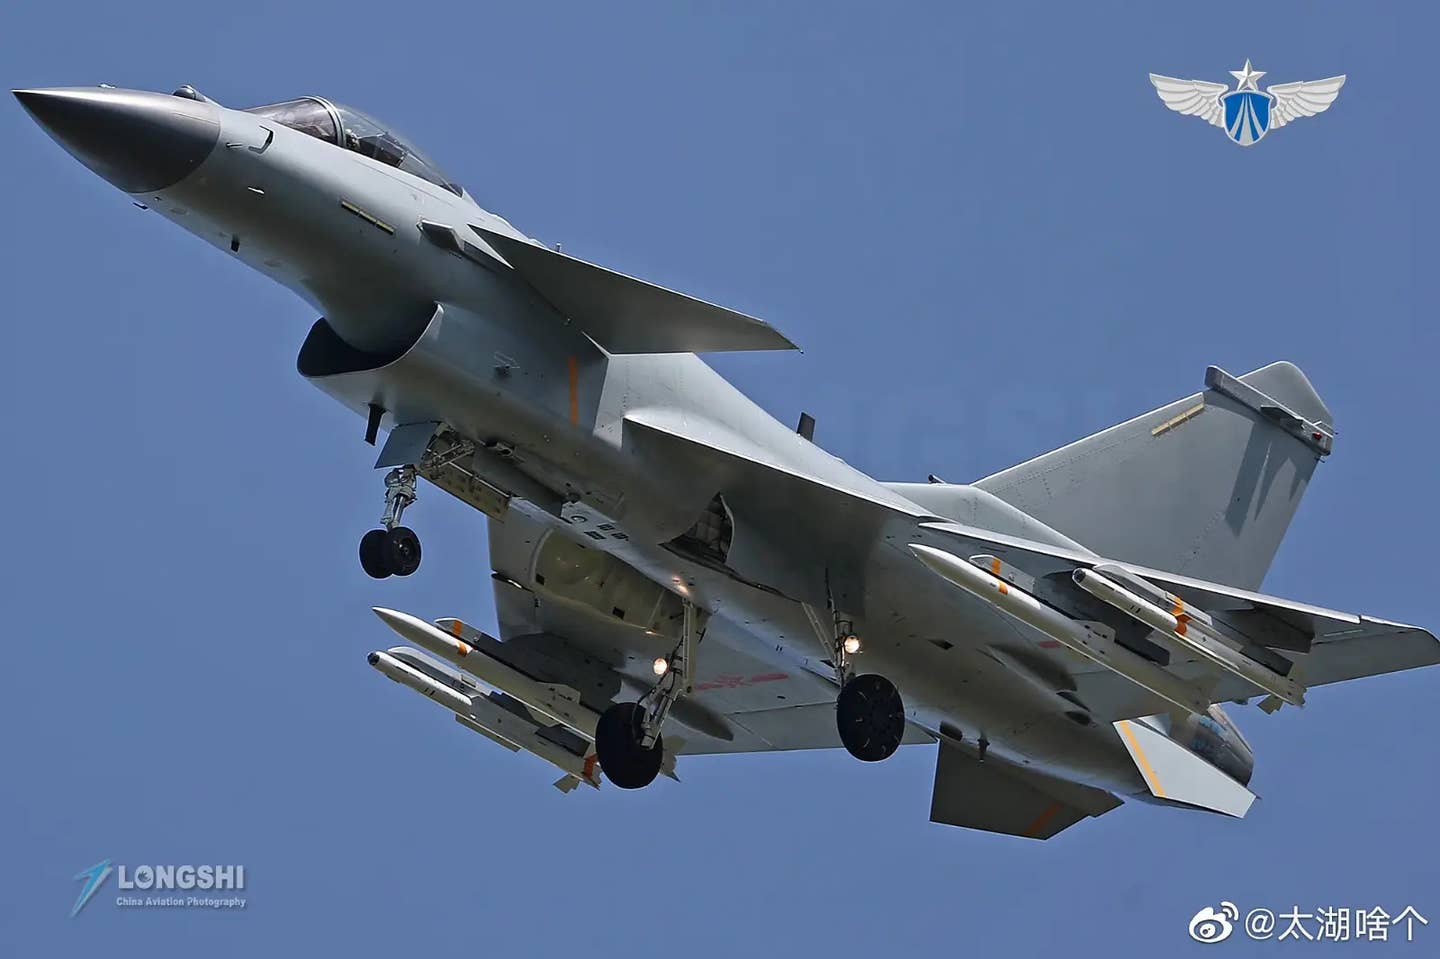 A J-10C variant armed with PL-15 (inboard) and PL-10 (outboard) AAMs. (Chinese internet)